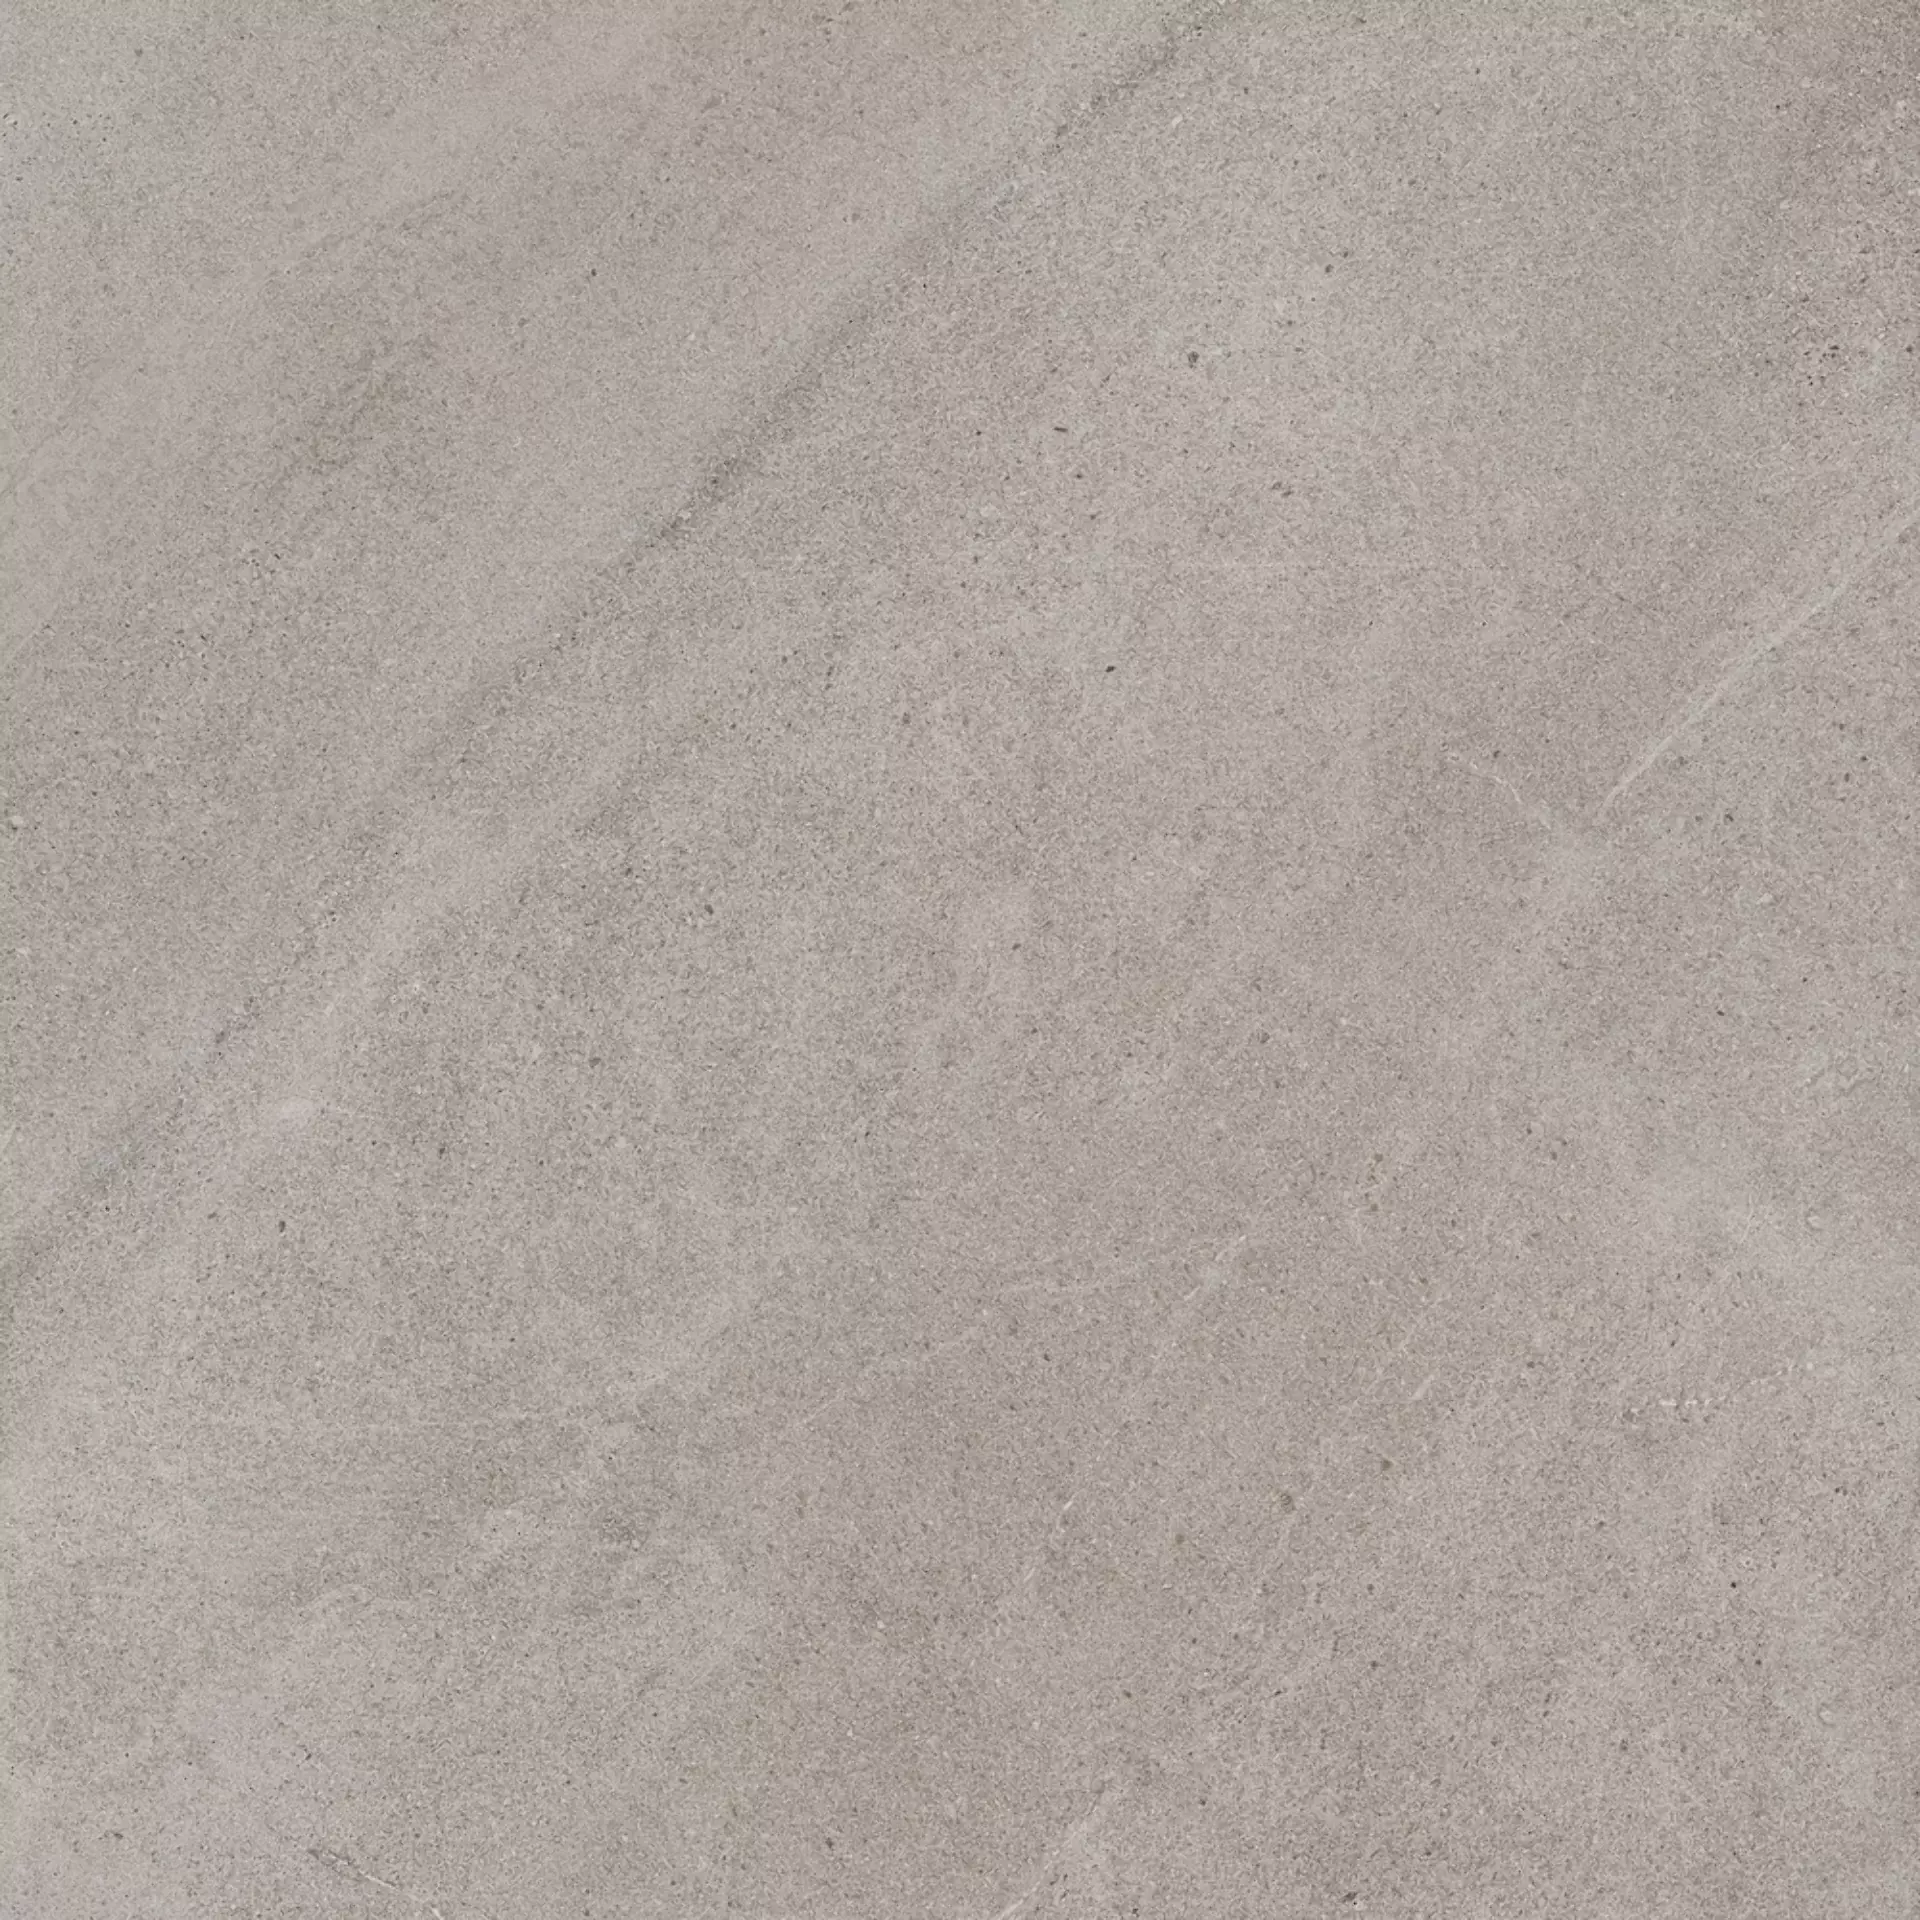 Cottodeste Limestone Oyster Honed Protect EGGLSH2 90x90cm rectified 14mm